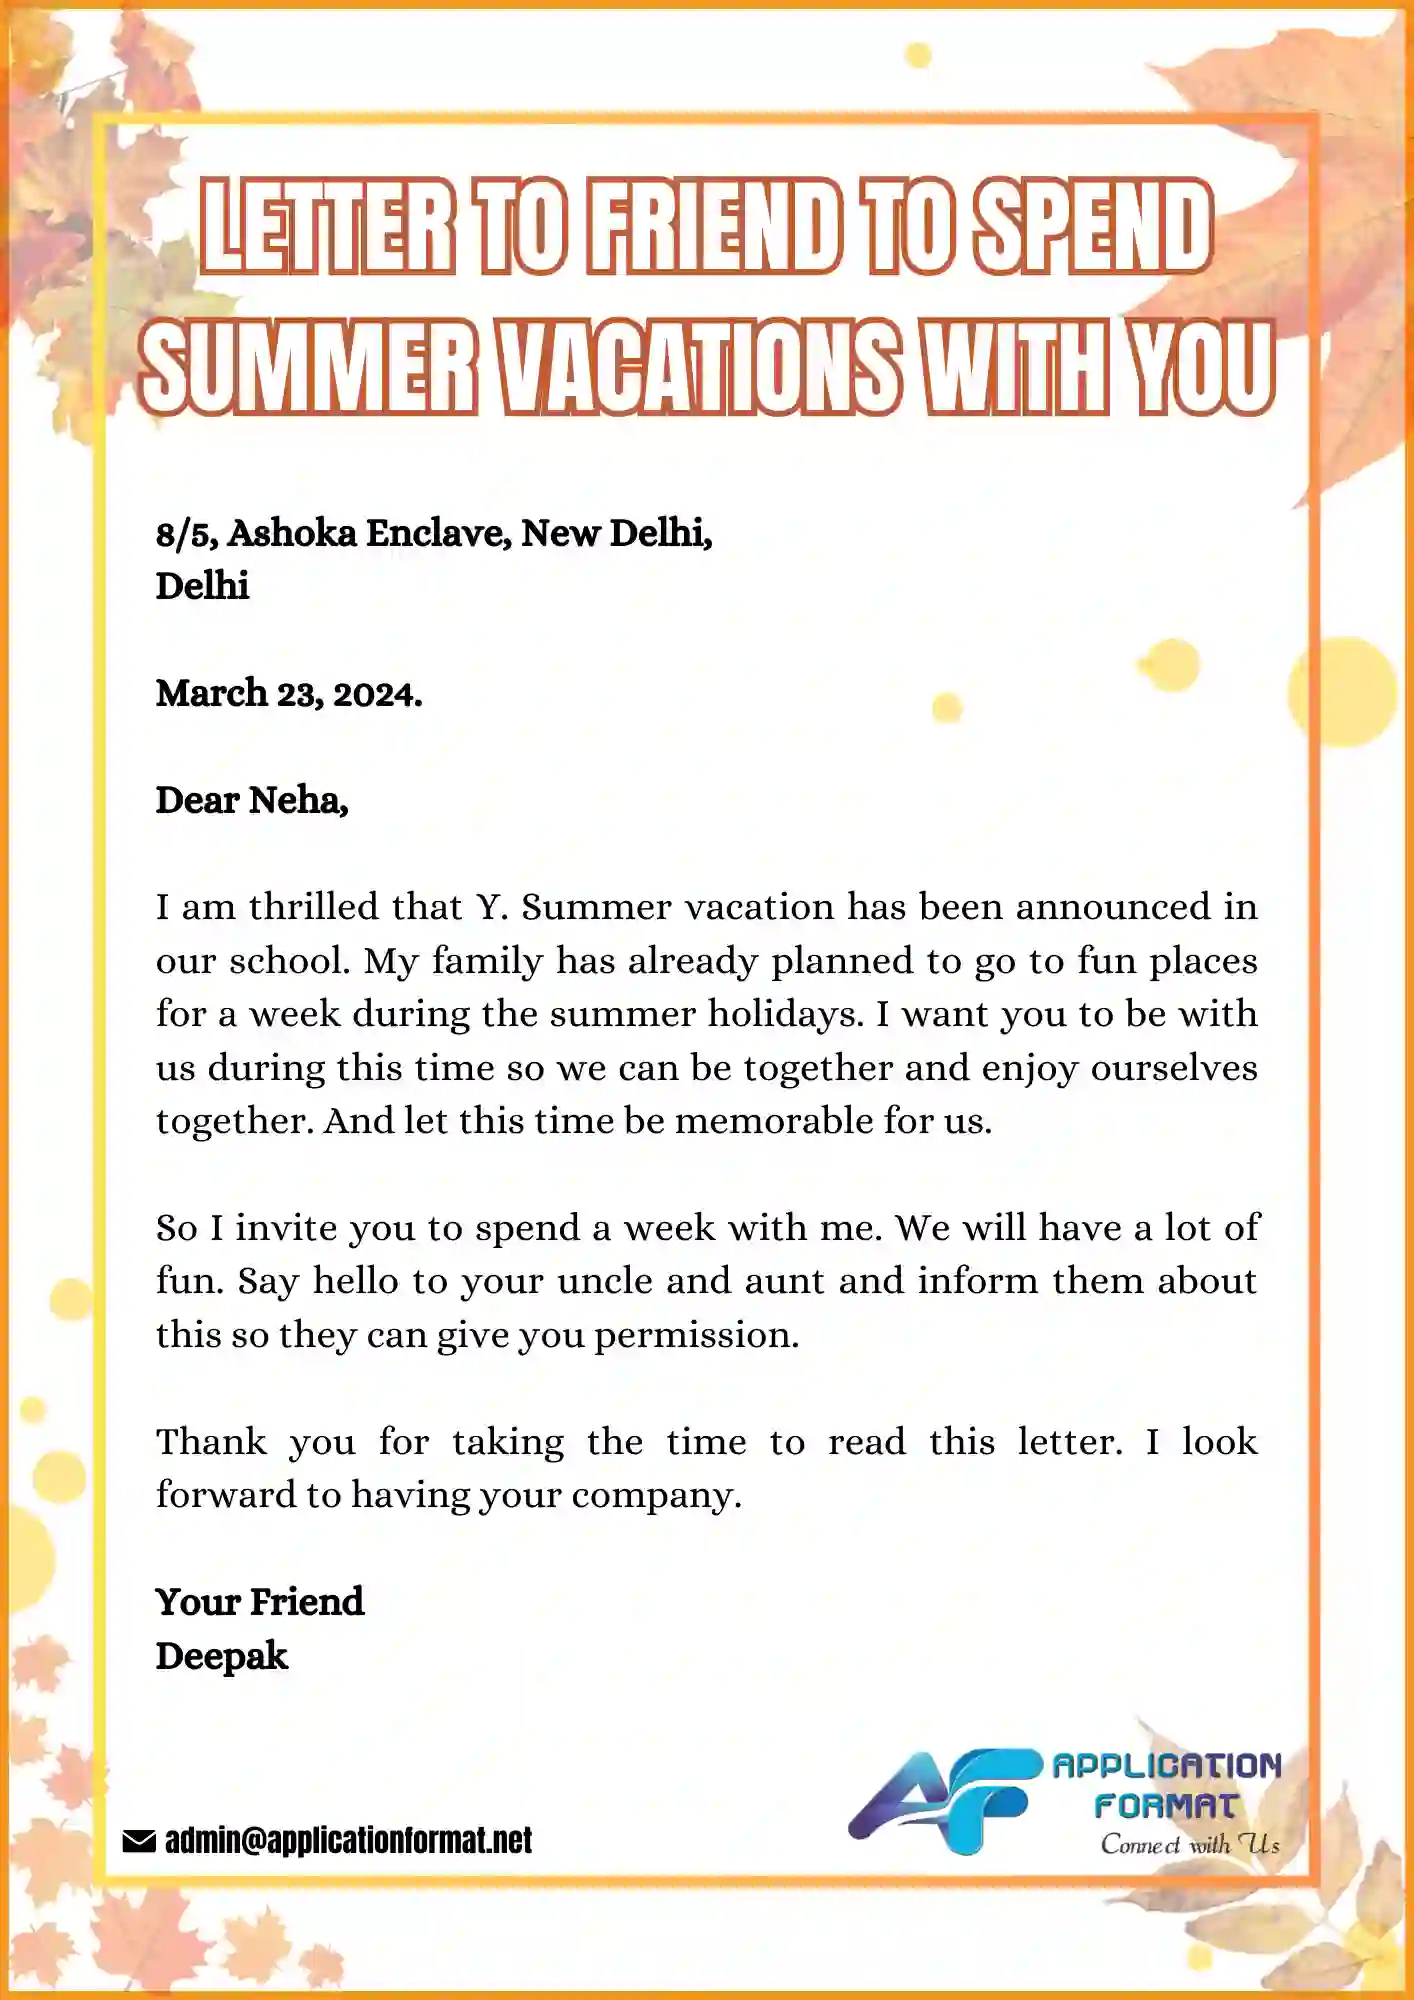 Letter to a friend inviting to spend summer vacation